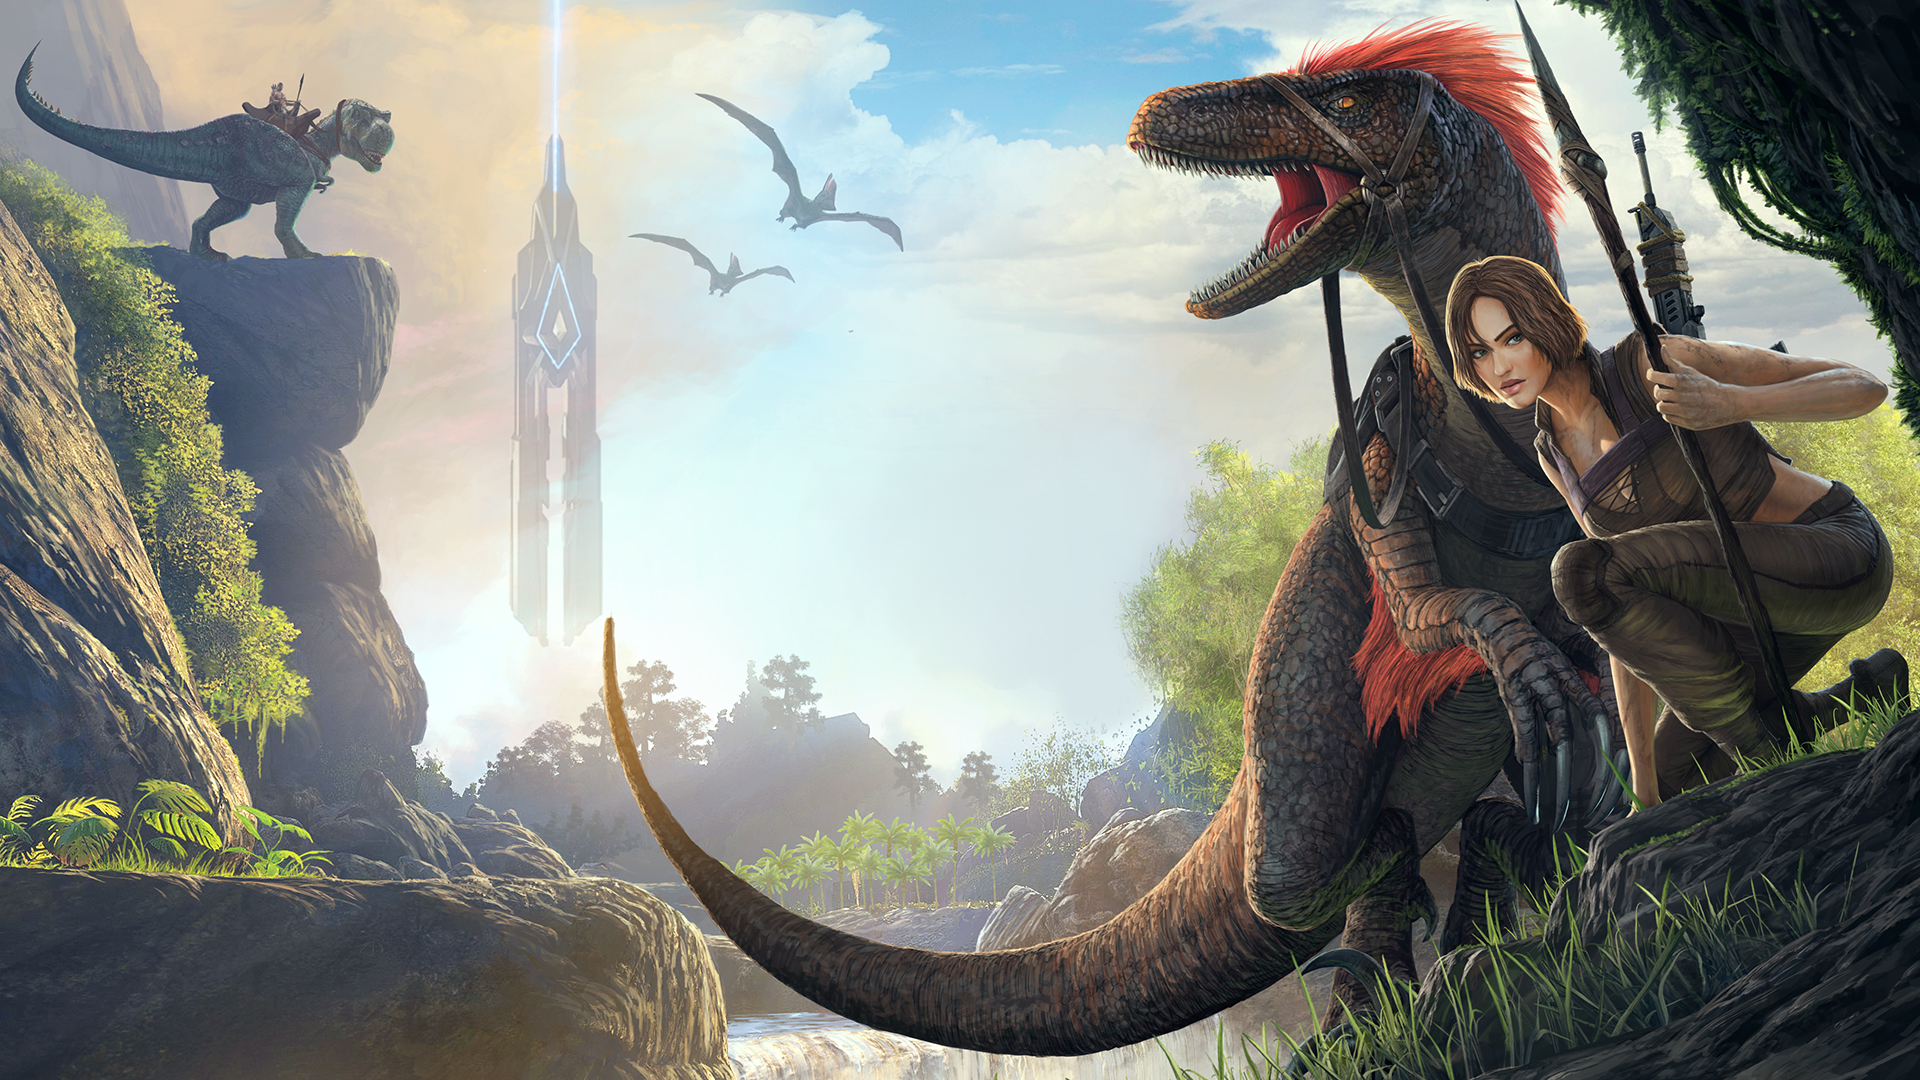 ARK: Survival Evolved Mobile image. Jungle landscape with dinosaurs of different species and a female character with a spear